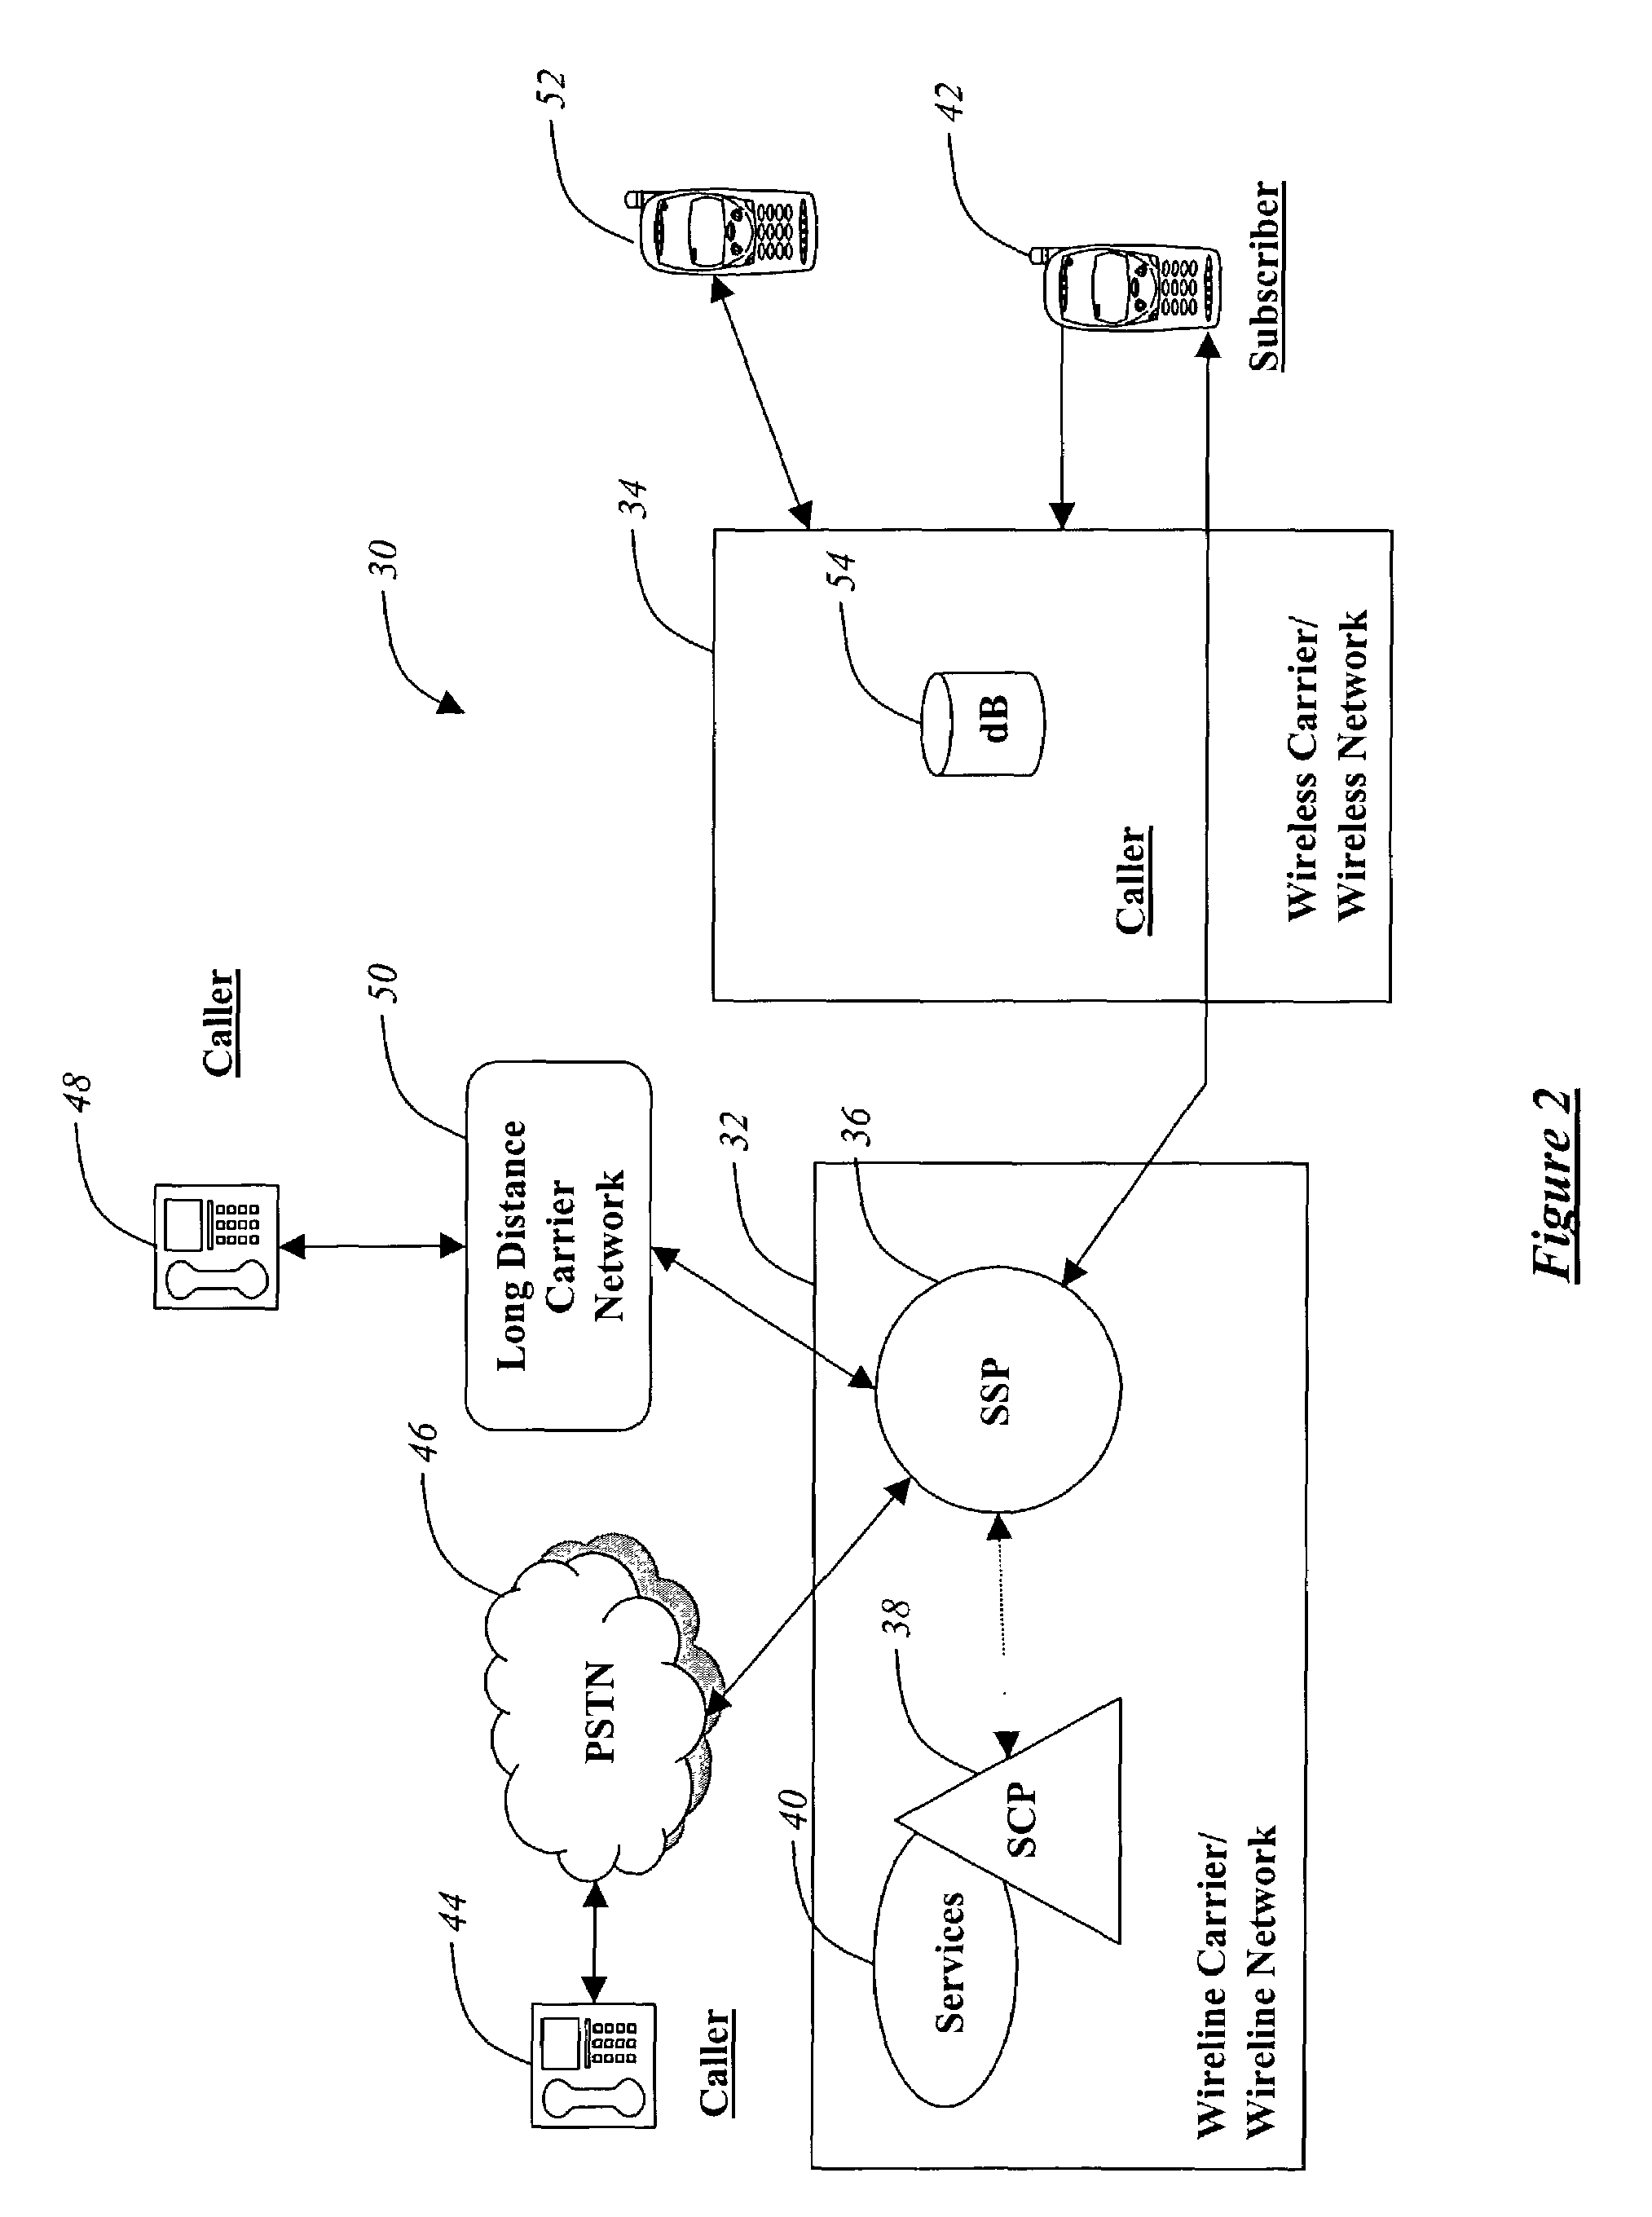 System and method for providing advanced wireless telephony services using a wireline telephone number